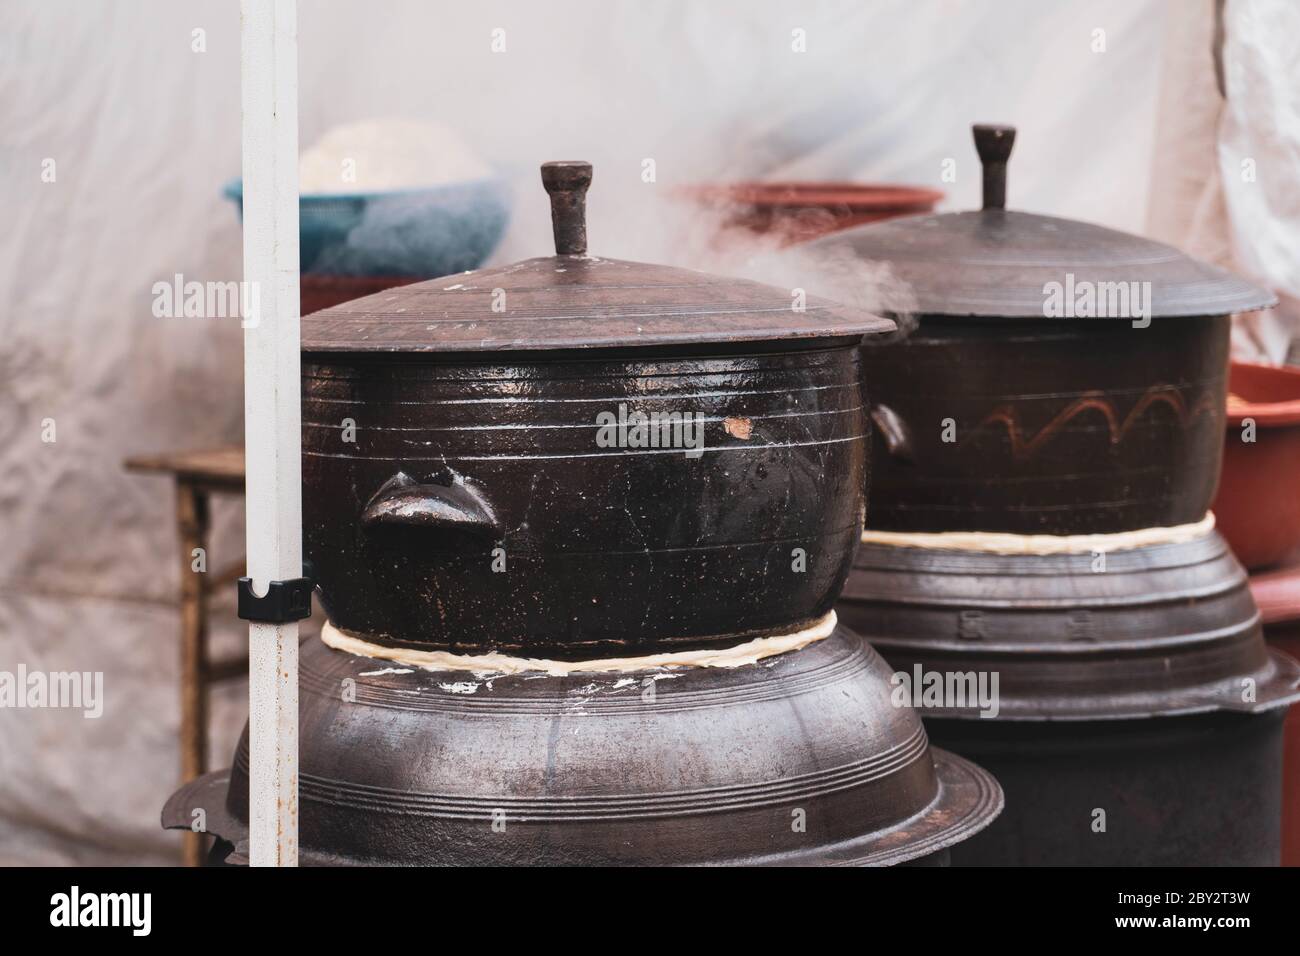 https://c8.alamy.com/comp/2BY2T3W/close-up-image-of-large-korean-traditional-ceramic-rice-cooker-with-smoke-coming-out-korean-stone-pot-2BY2T3W.jpg